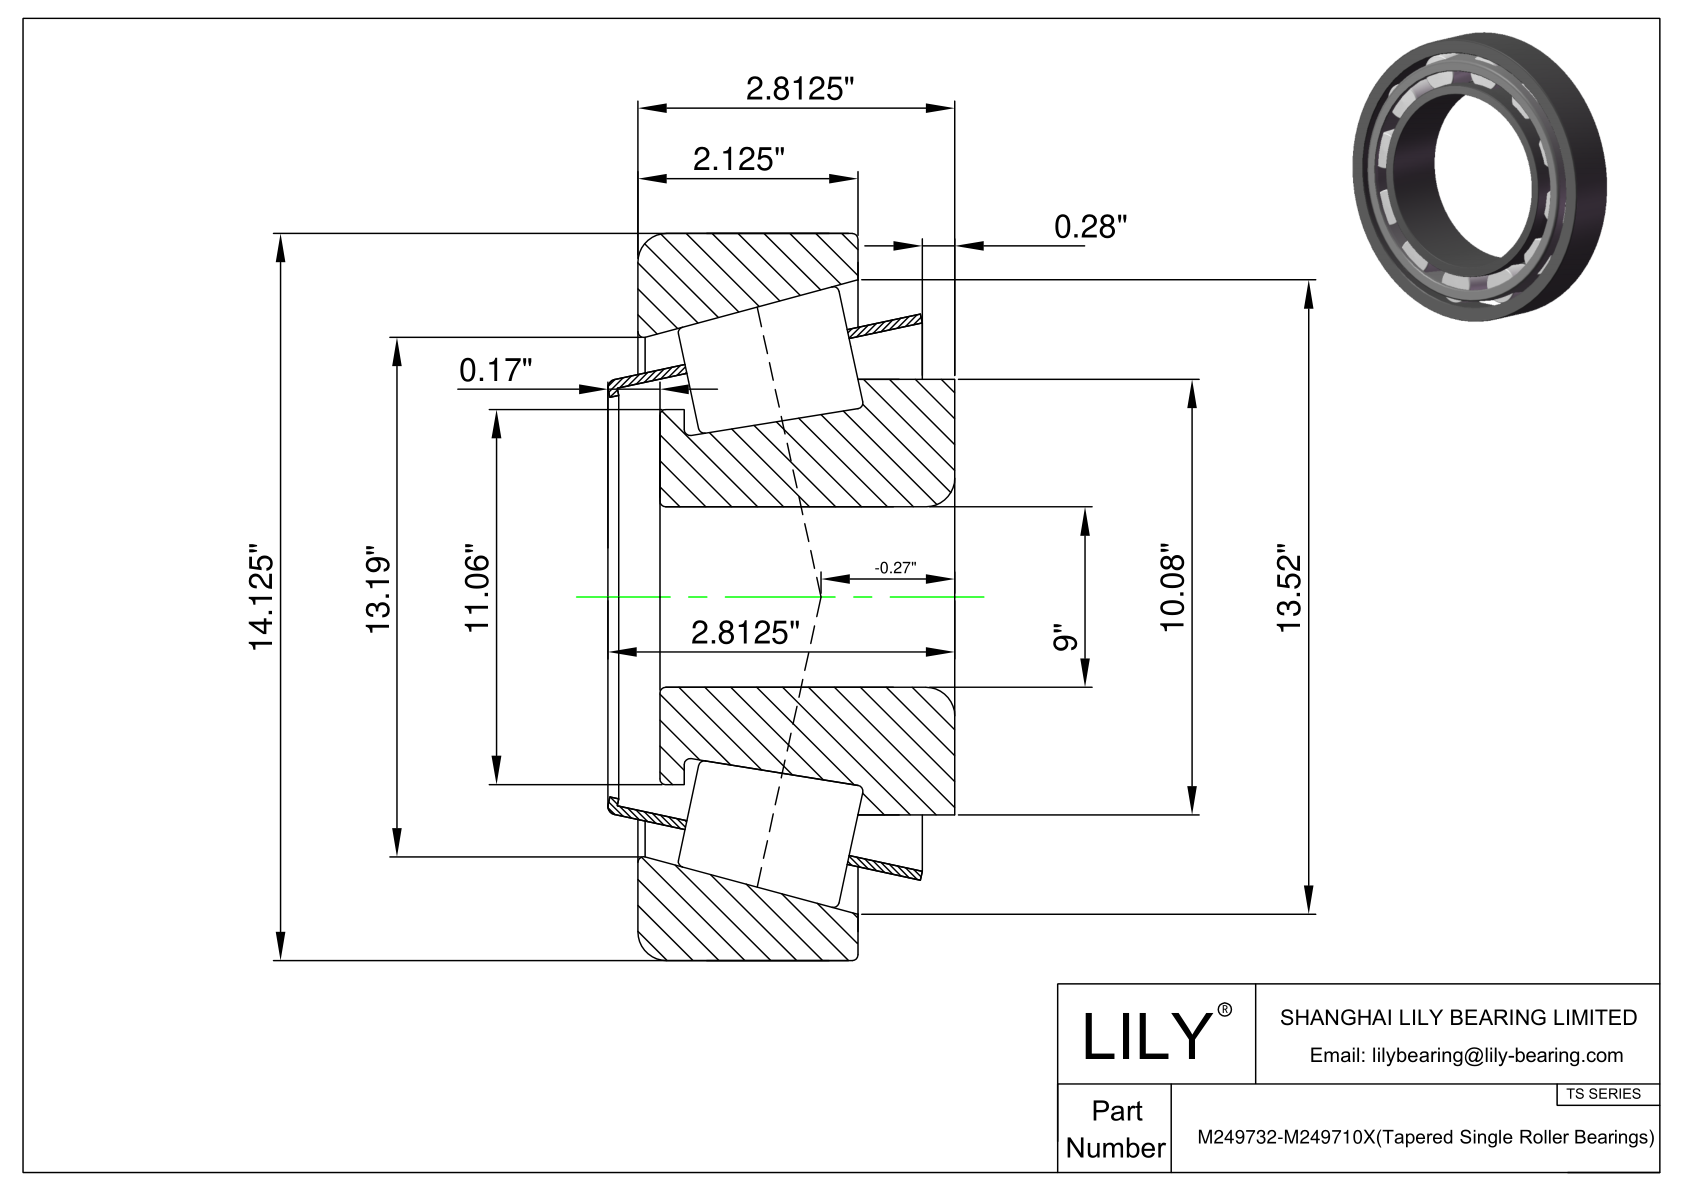 M249732-M249710X TS (Tapered Single Roller Bearings) (Imperial) cad drawing